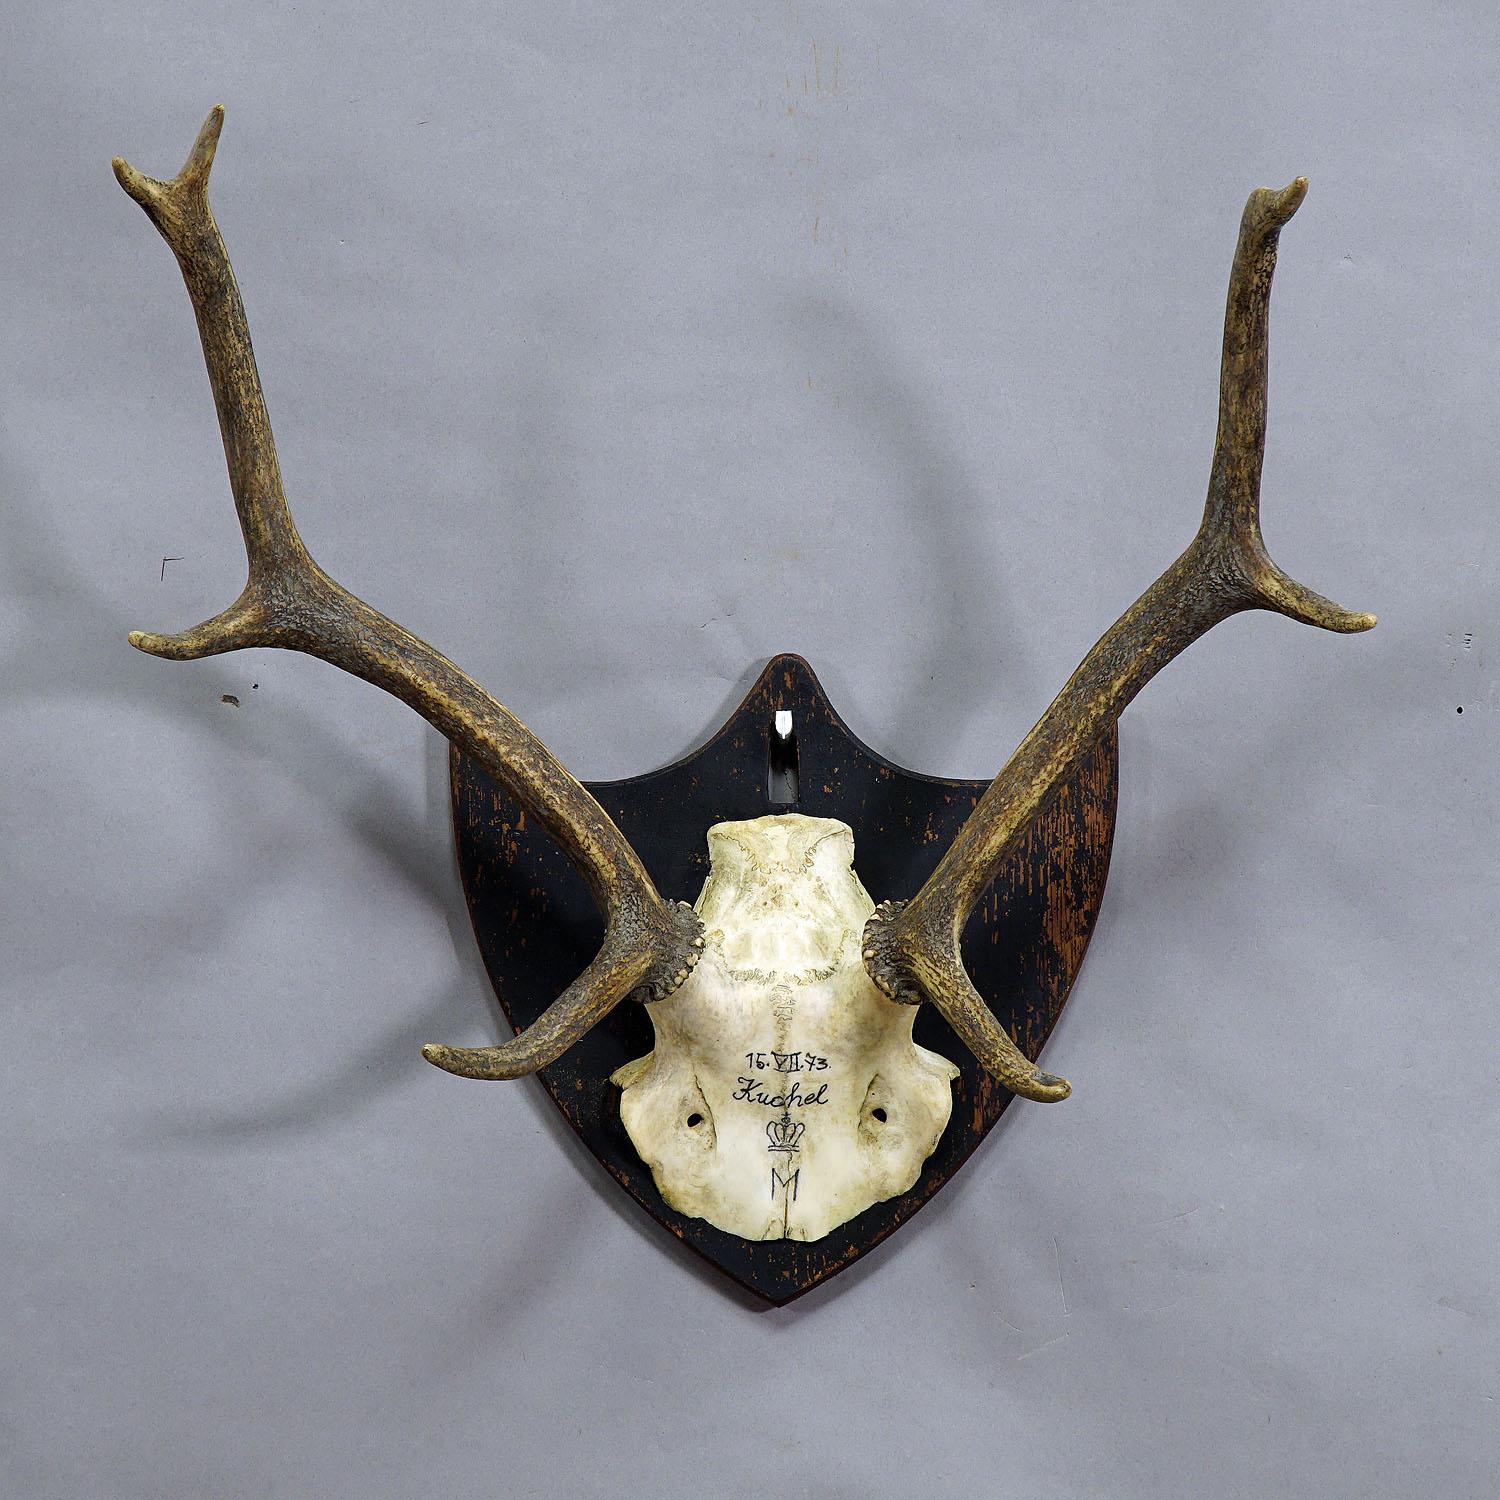 An uneven 8 pointer black forest deer trophy from the palace of salem in south germany. shoot by a member of the lordly family of Baden in 1873. handwritten inscriptions on the skull with, place of the hunt, family crest and date. mounted on a nice